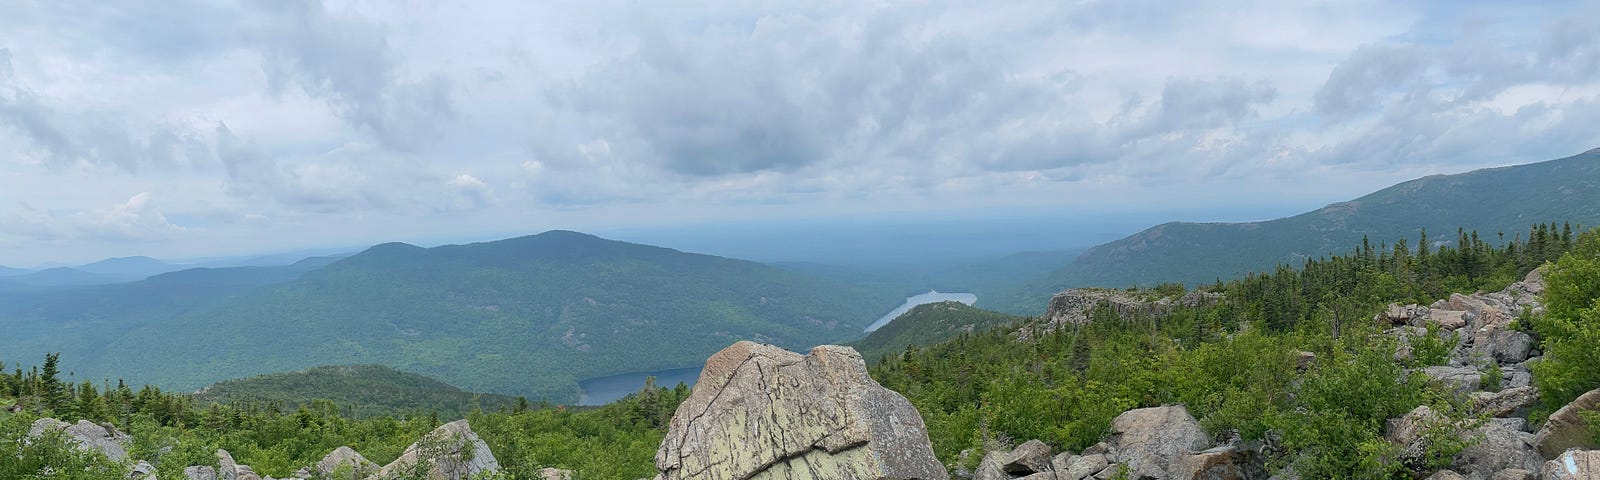 Mountaintop view with large boulders in the foreground and green mountain peaks in the background. In the middle, below, you can see a small lake peeking out. The sky is hazy with clouds and sun.